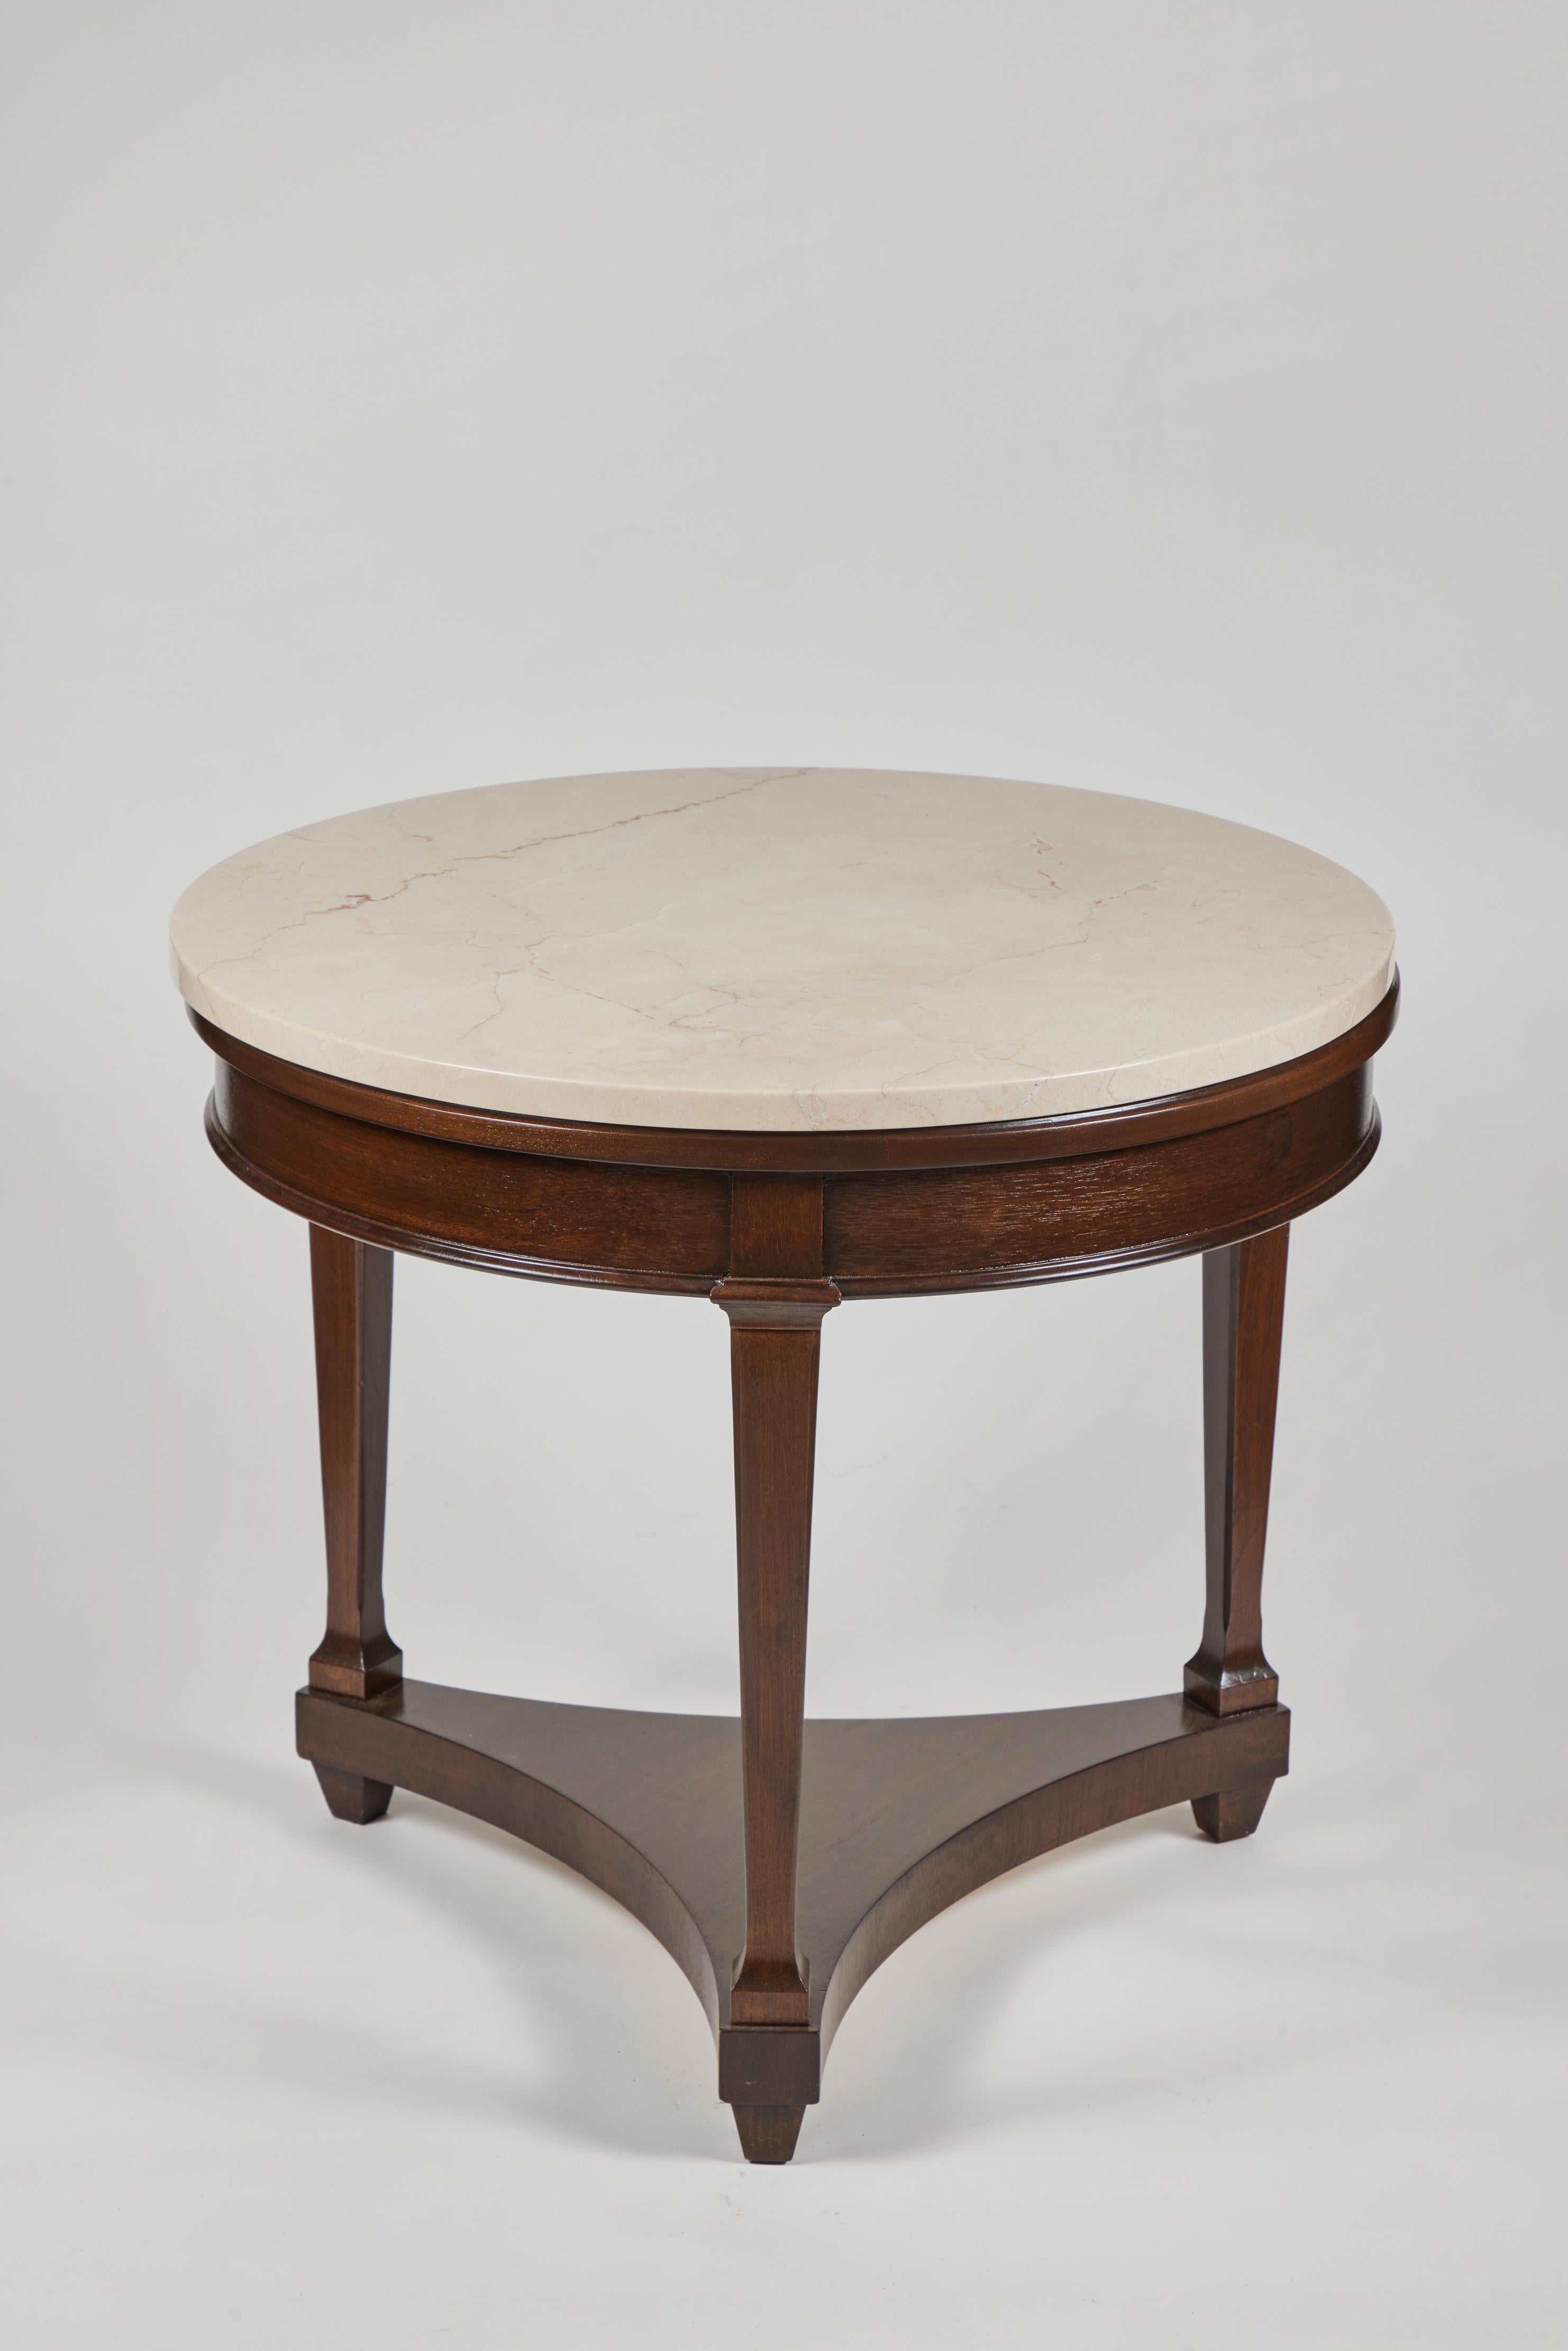 Vintage round 3 leg oak side table, newly refurbished and with a new creamy/gold marble top.